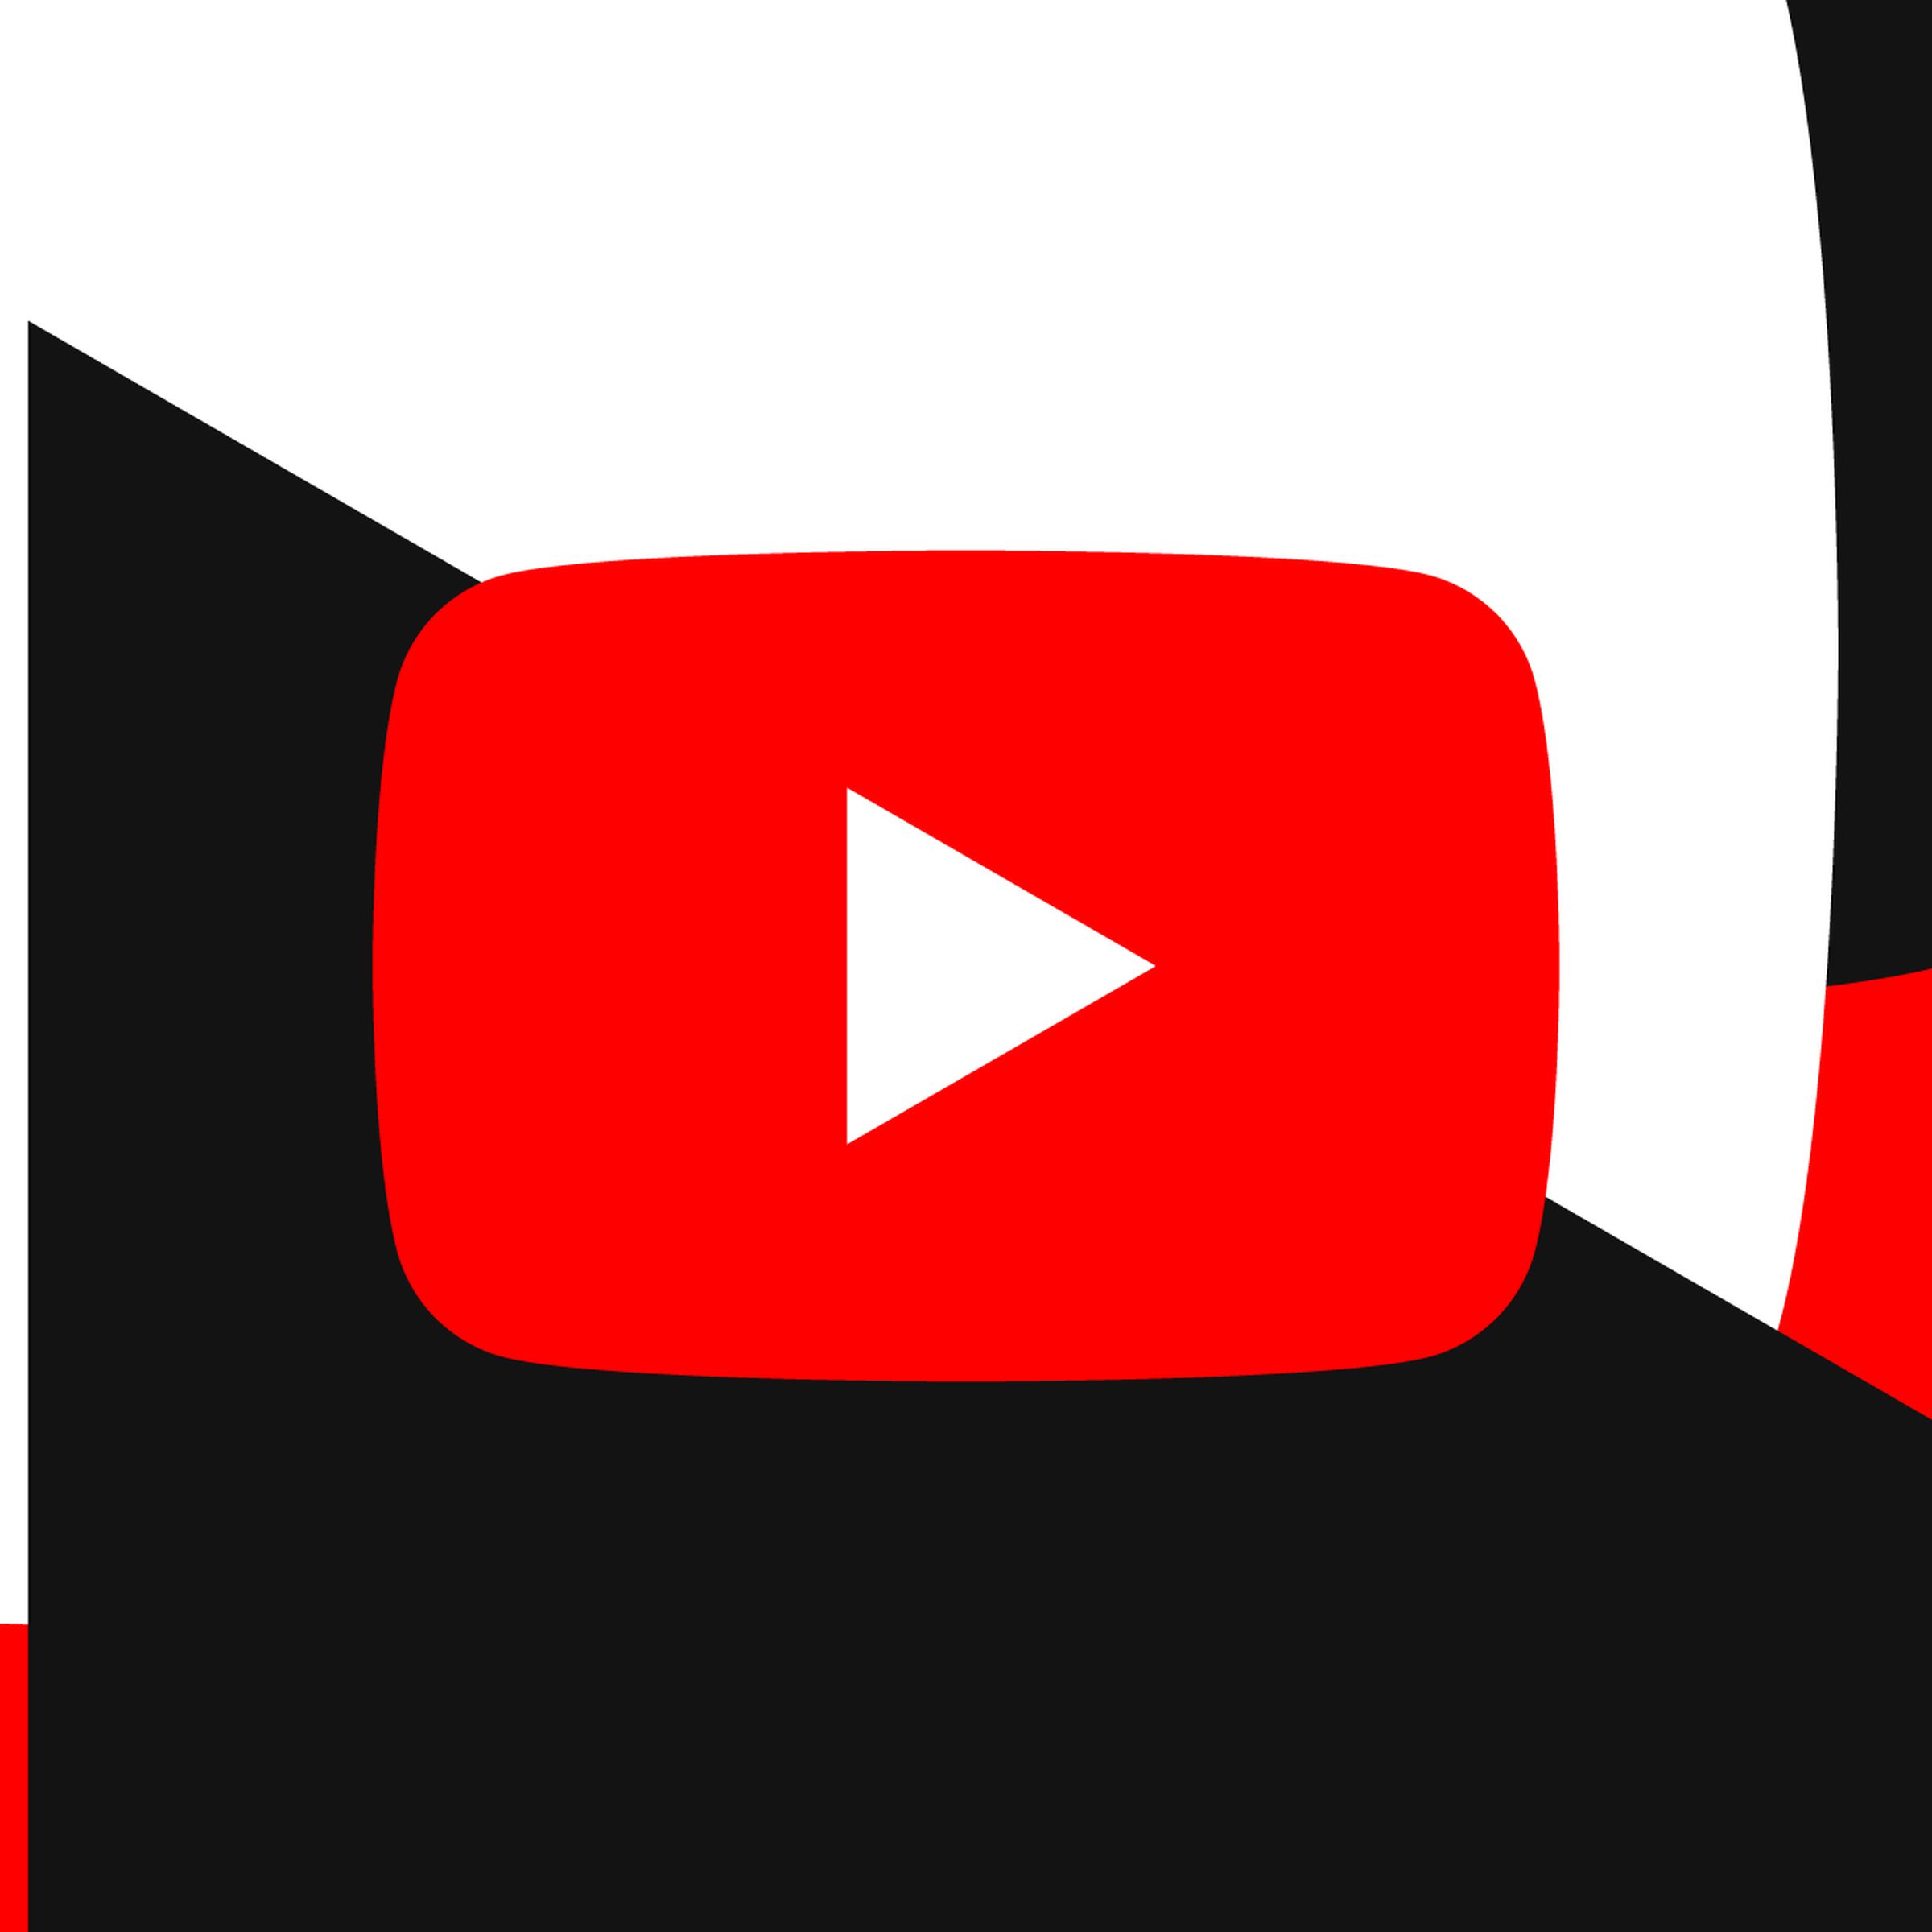 YouTube’s logo with geometric design in the background